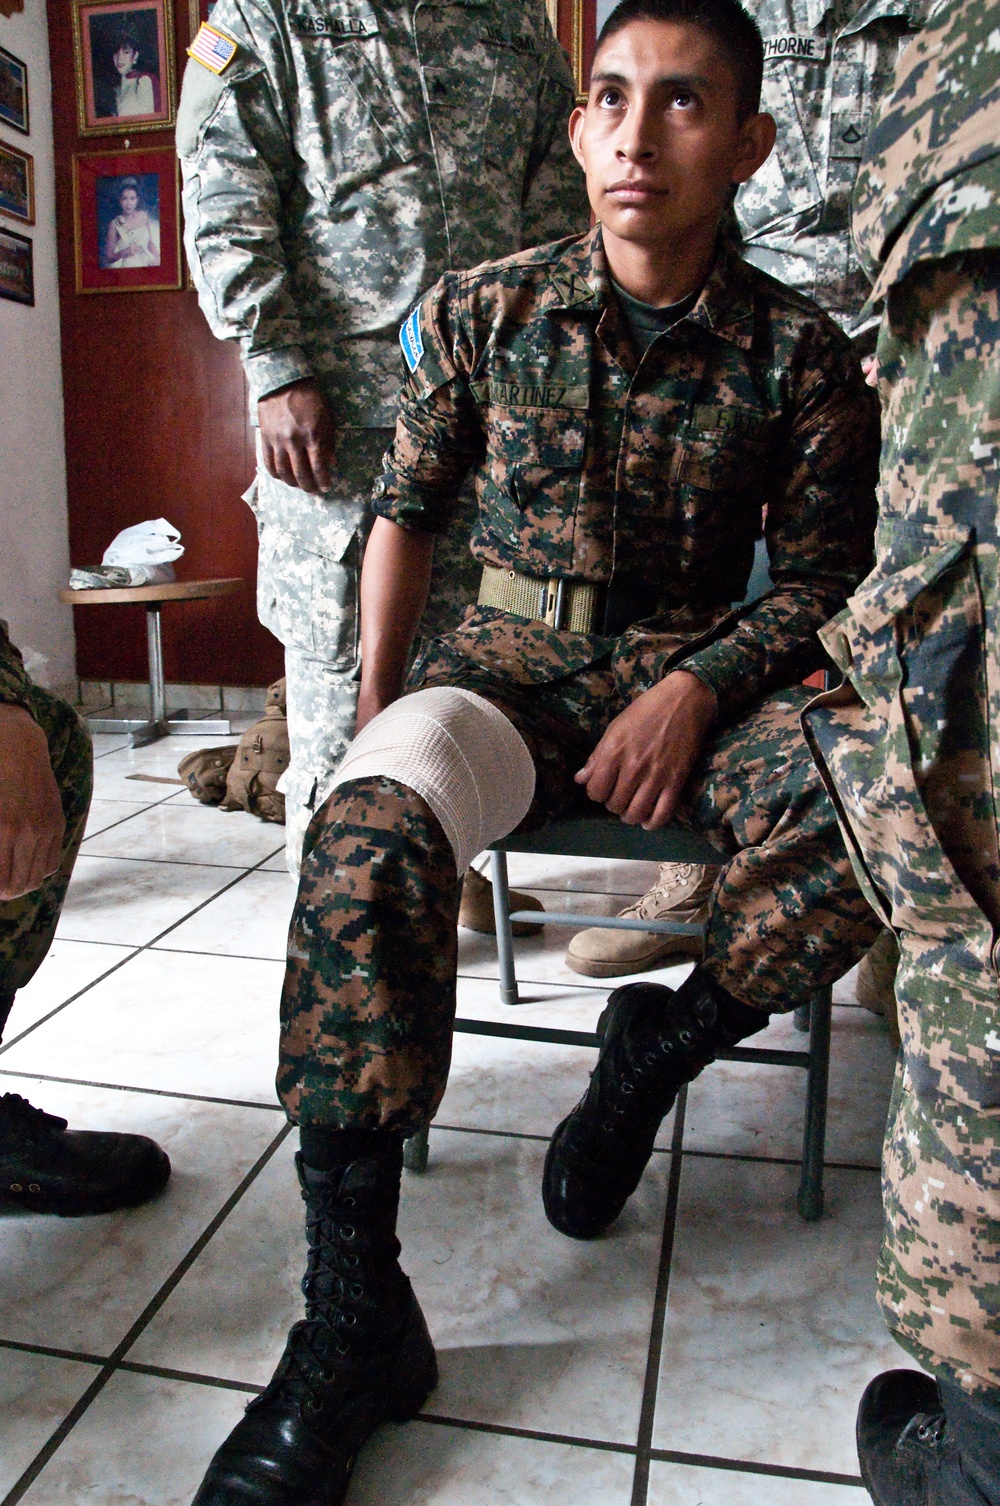 Salvadoran soldier learns first aid